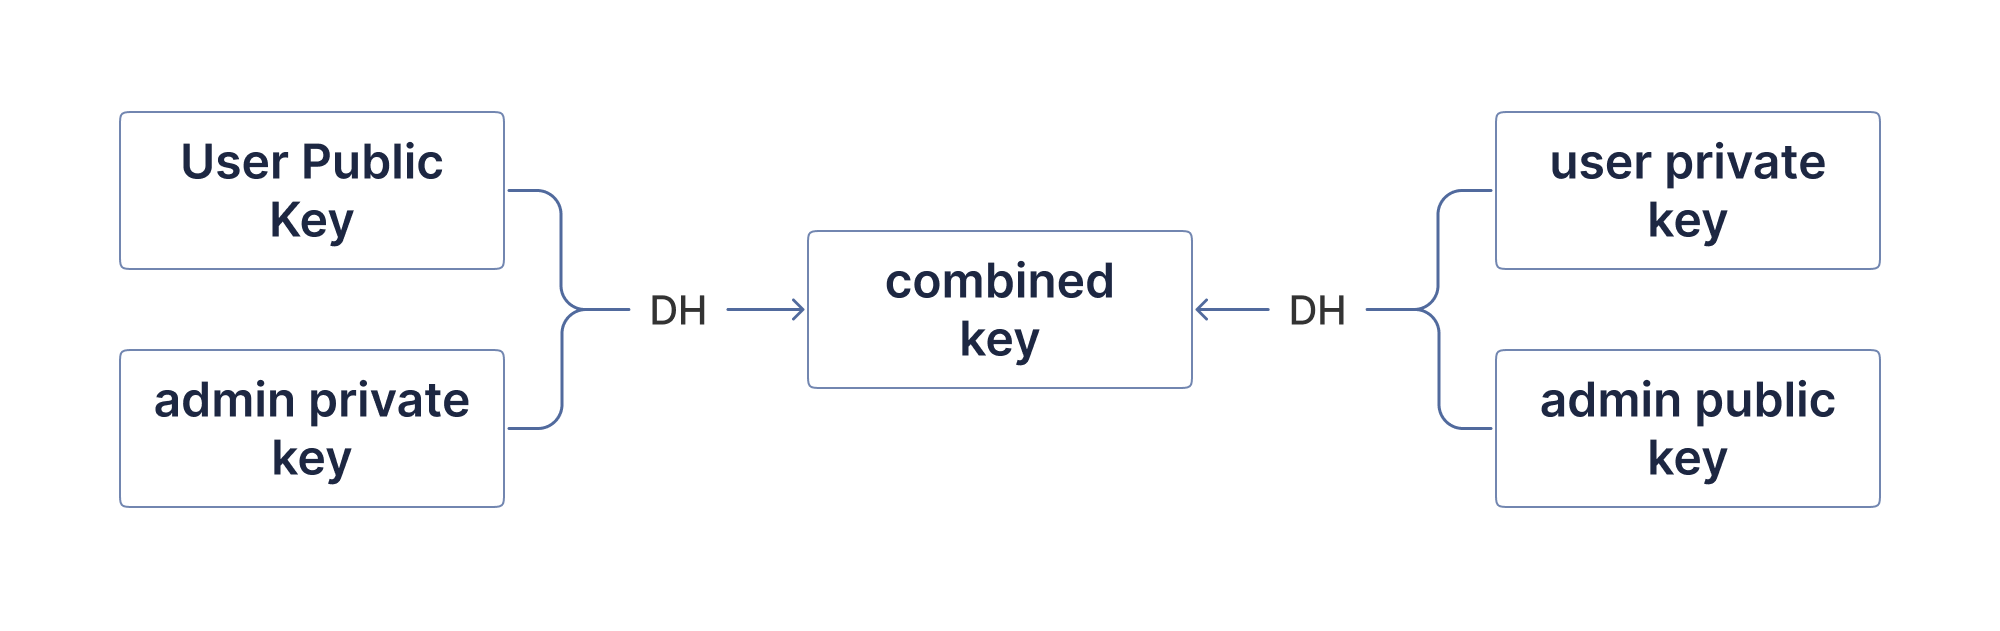 Image 5: The Combined Key can be obtained from two distinct derivations